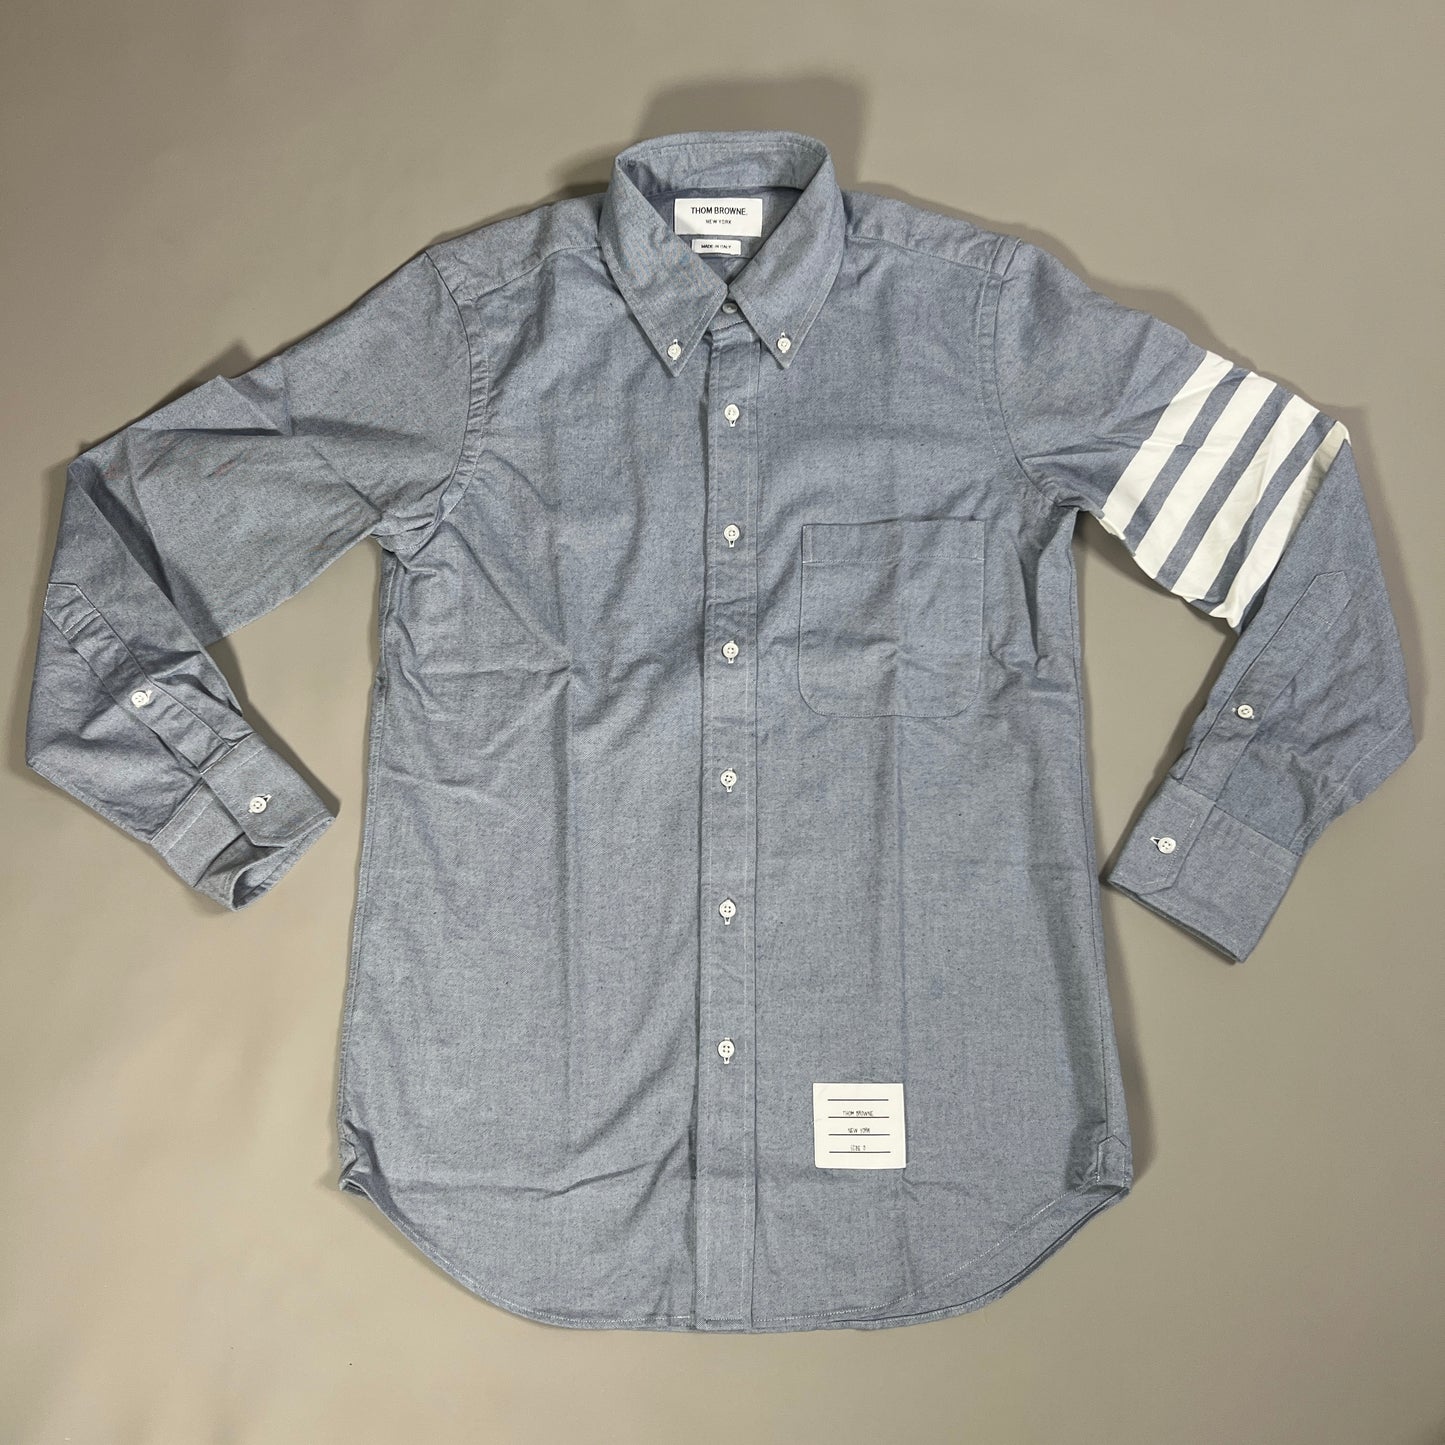 THOM BROWNE Straight Fit BD LS Shirt w/CB RWB GG in Solid Flannel w/woven 4 Bar Stripe in Light Blue Size 0 (NEW)